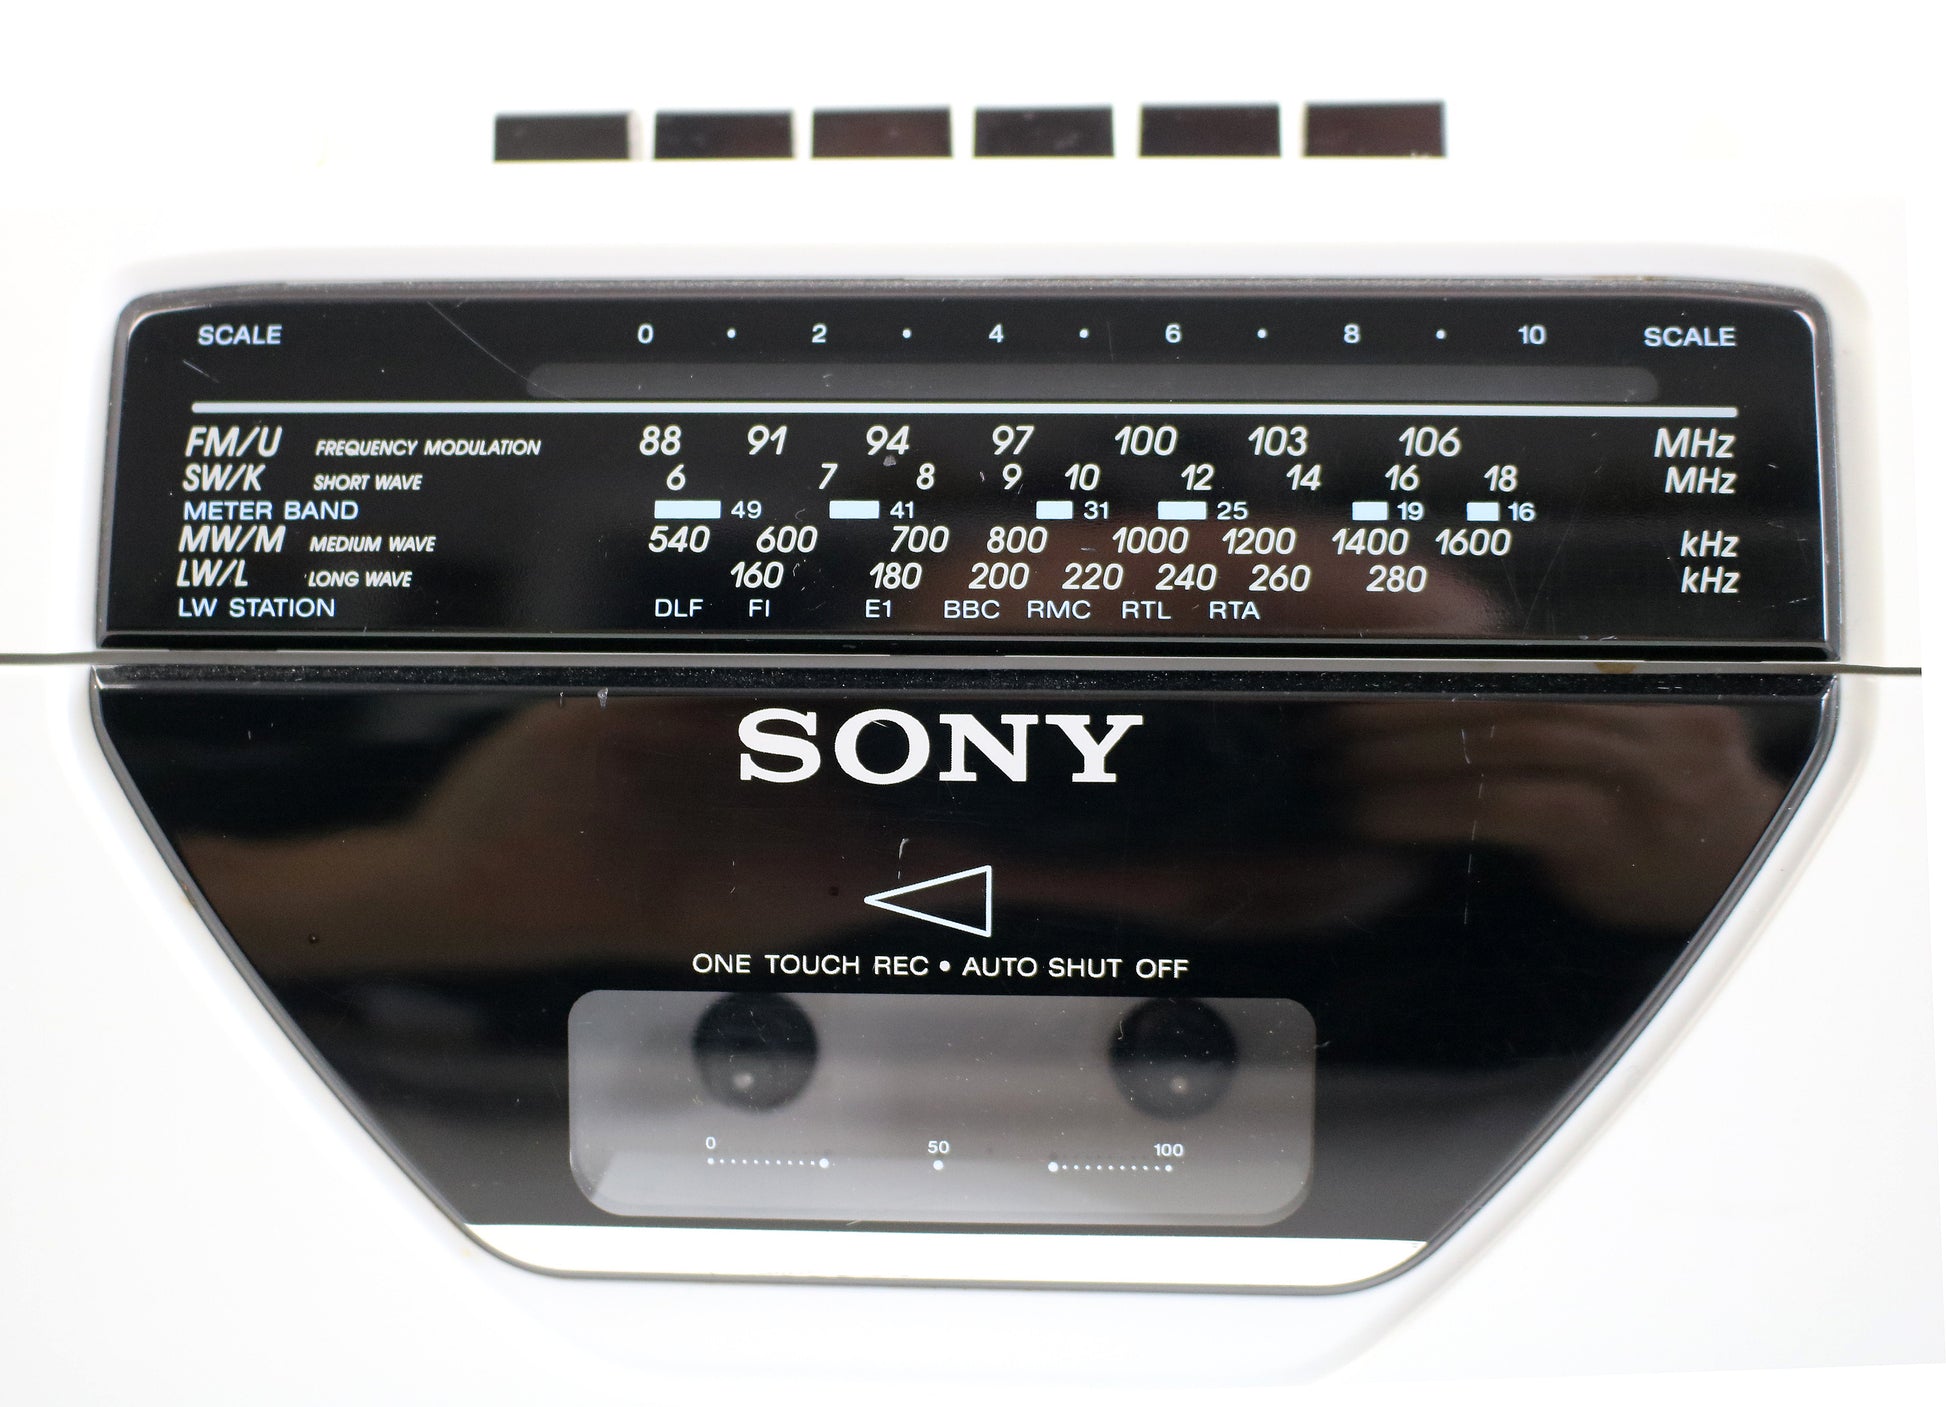 Space age 1989 Sony boombox - radio cassette in pearl white – Kuladot